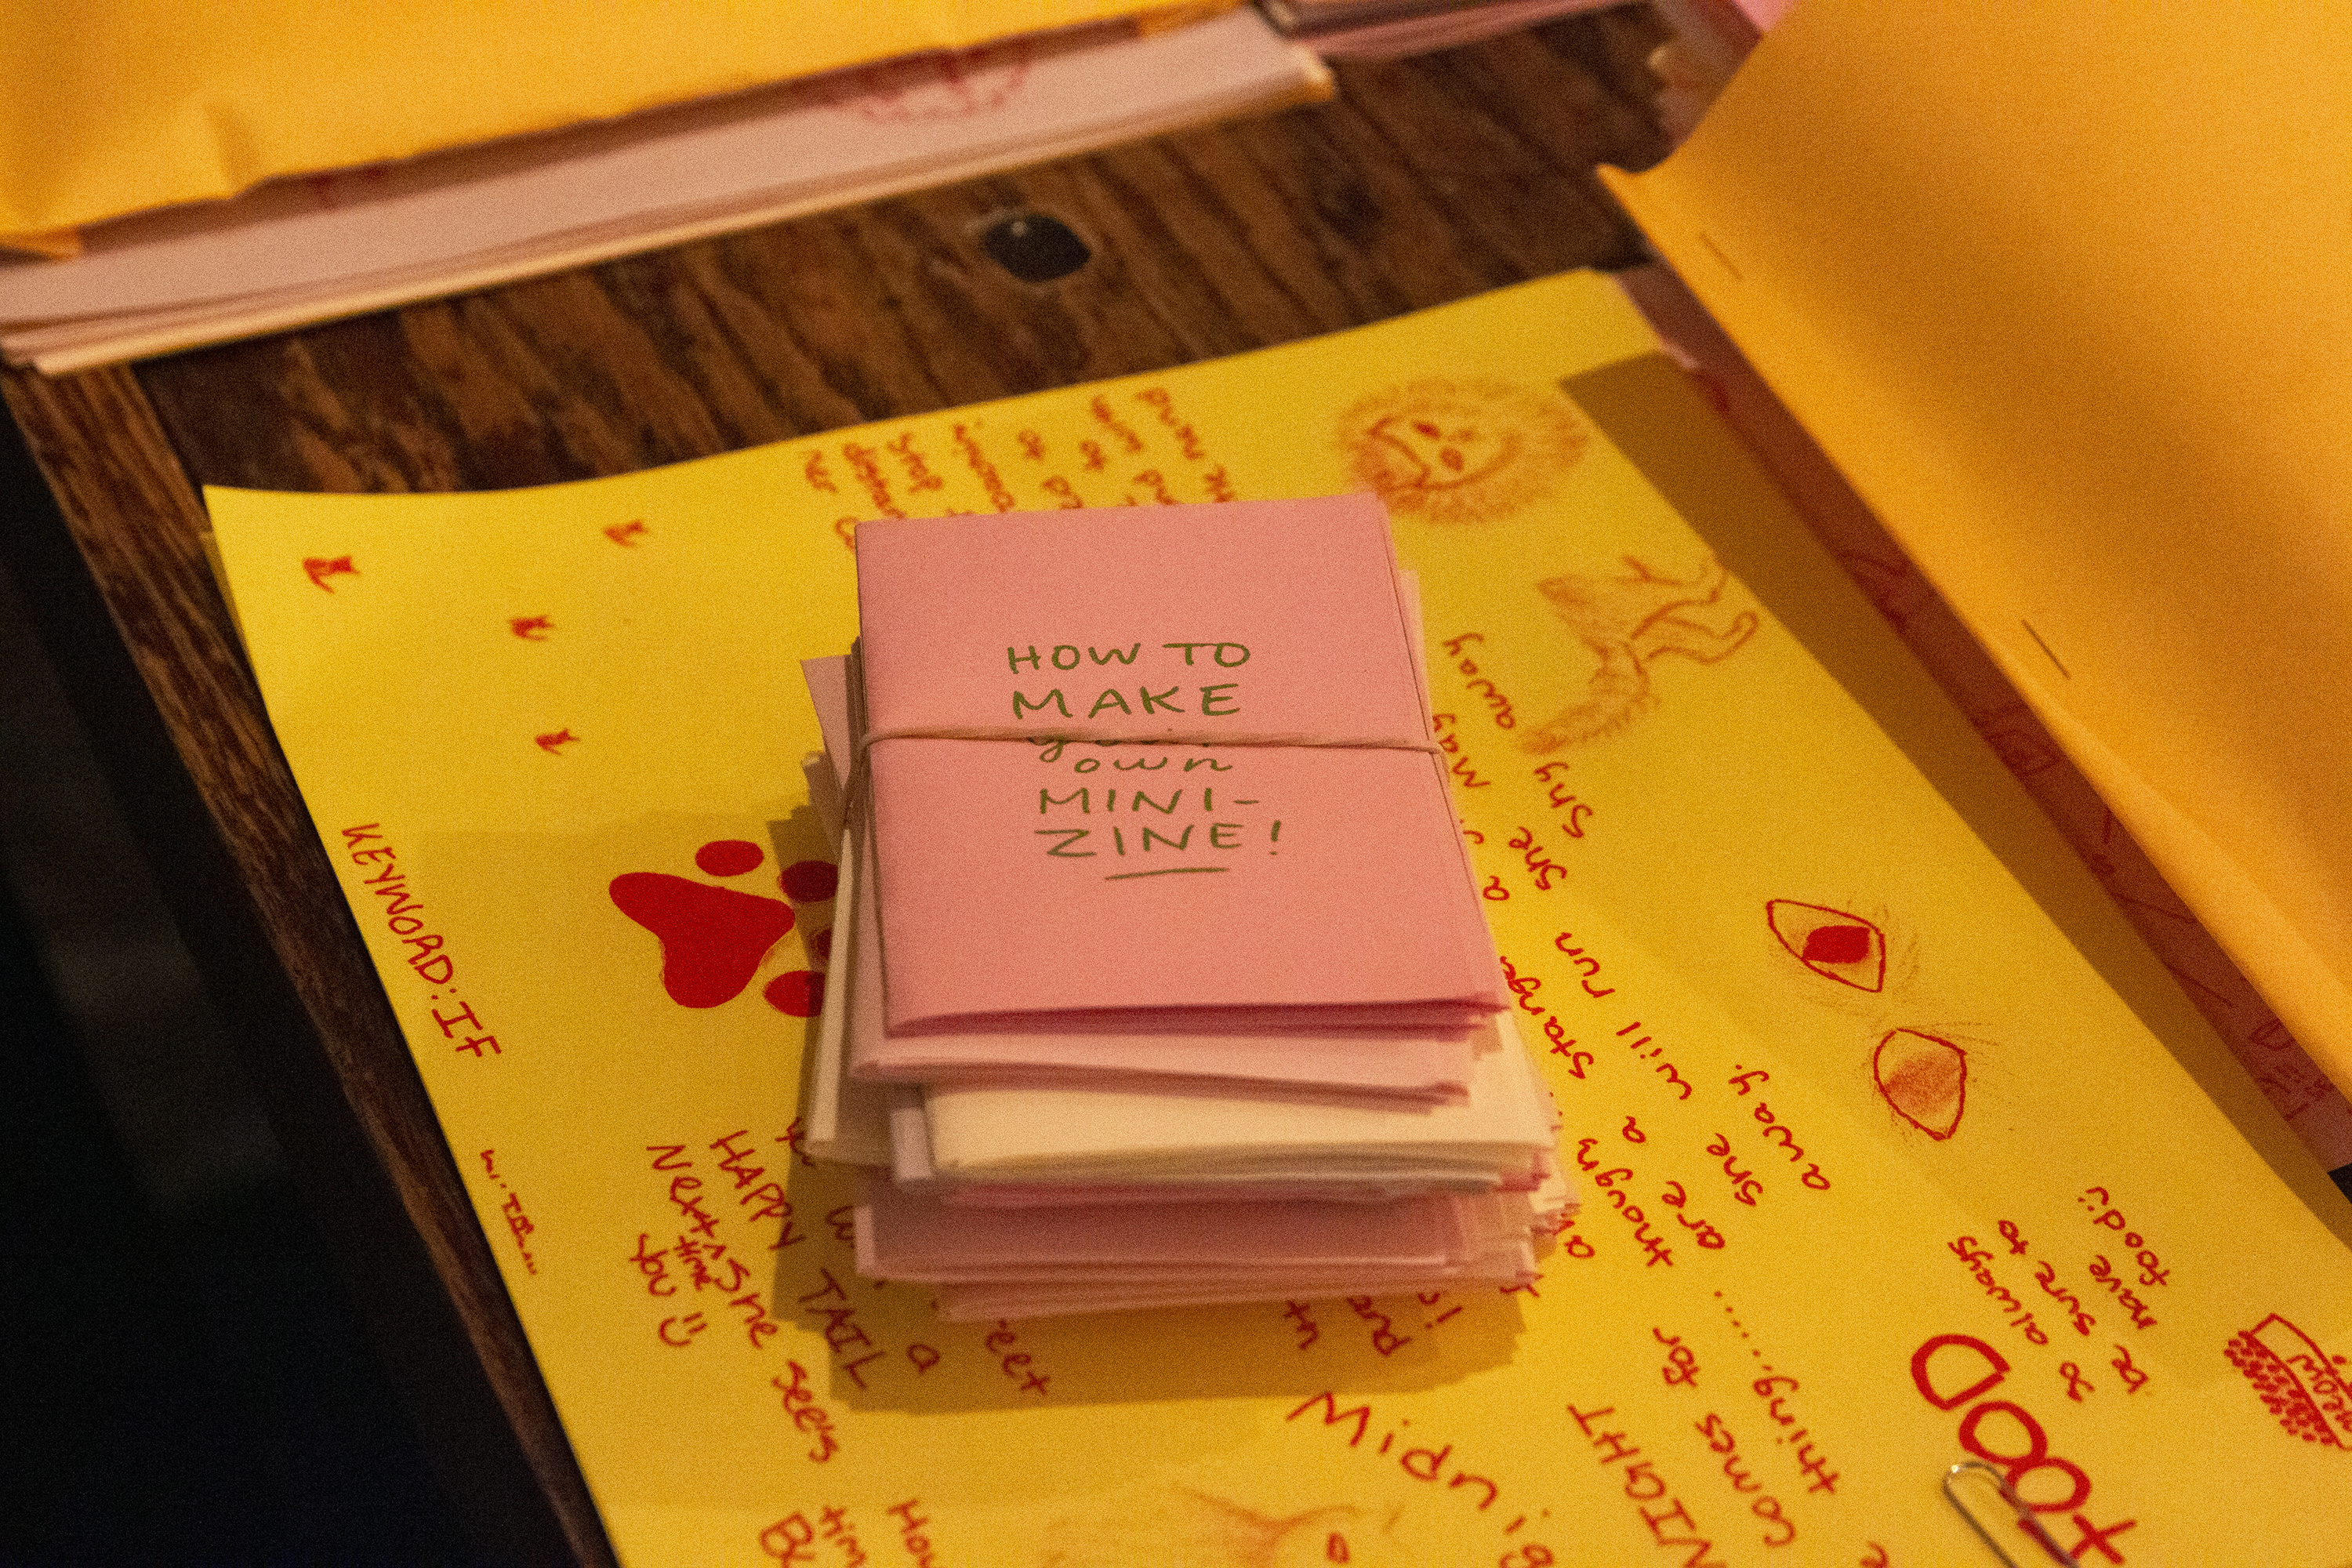 A stack of zines, the top reading "How to Make Your Own Zine"